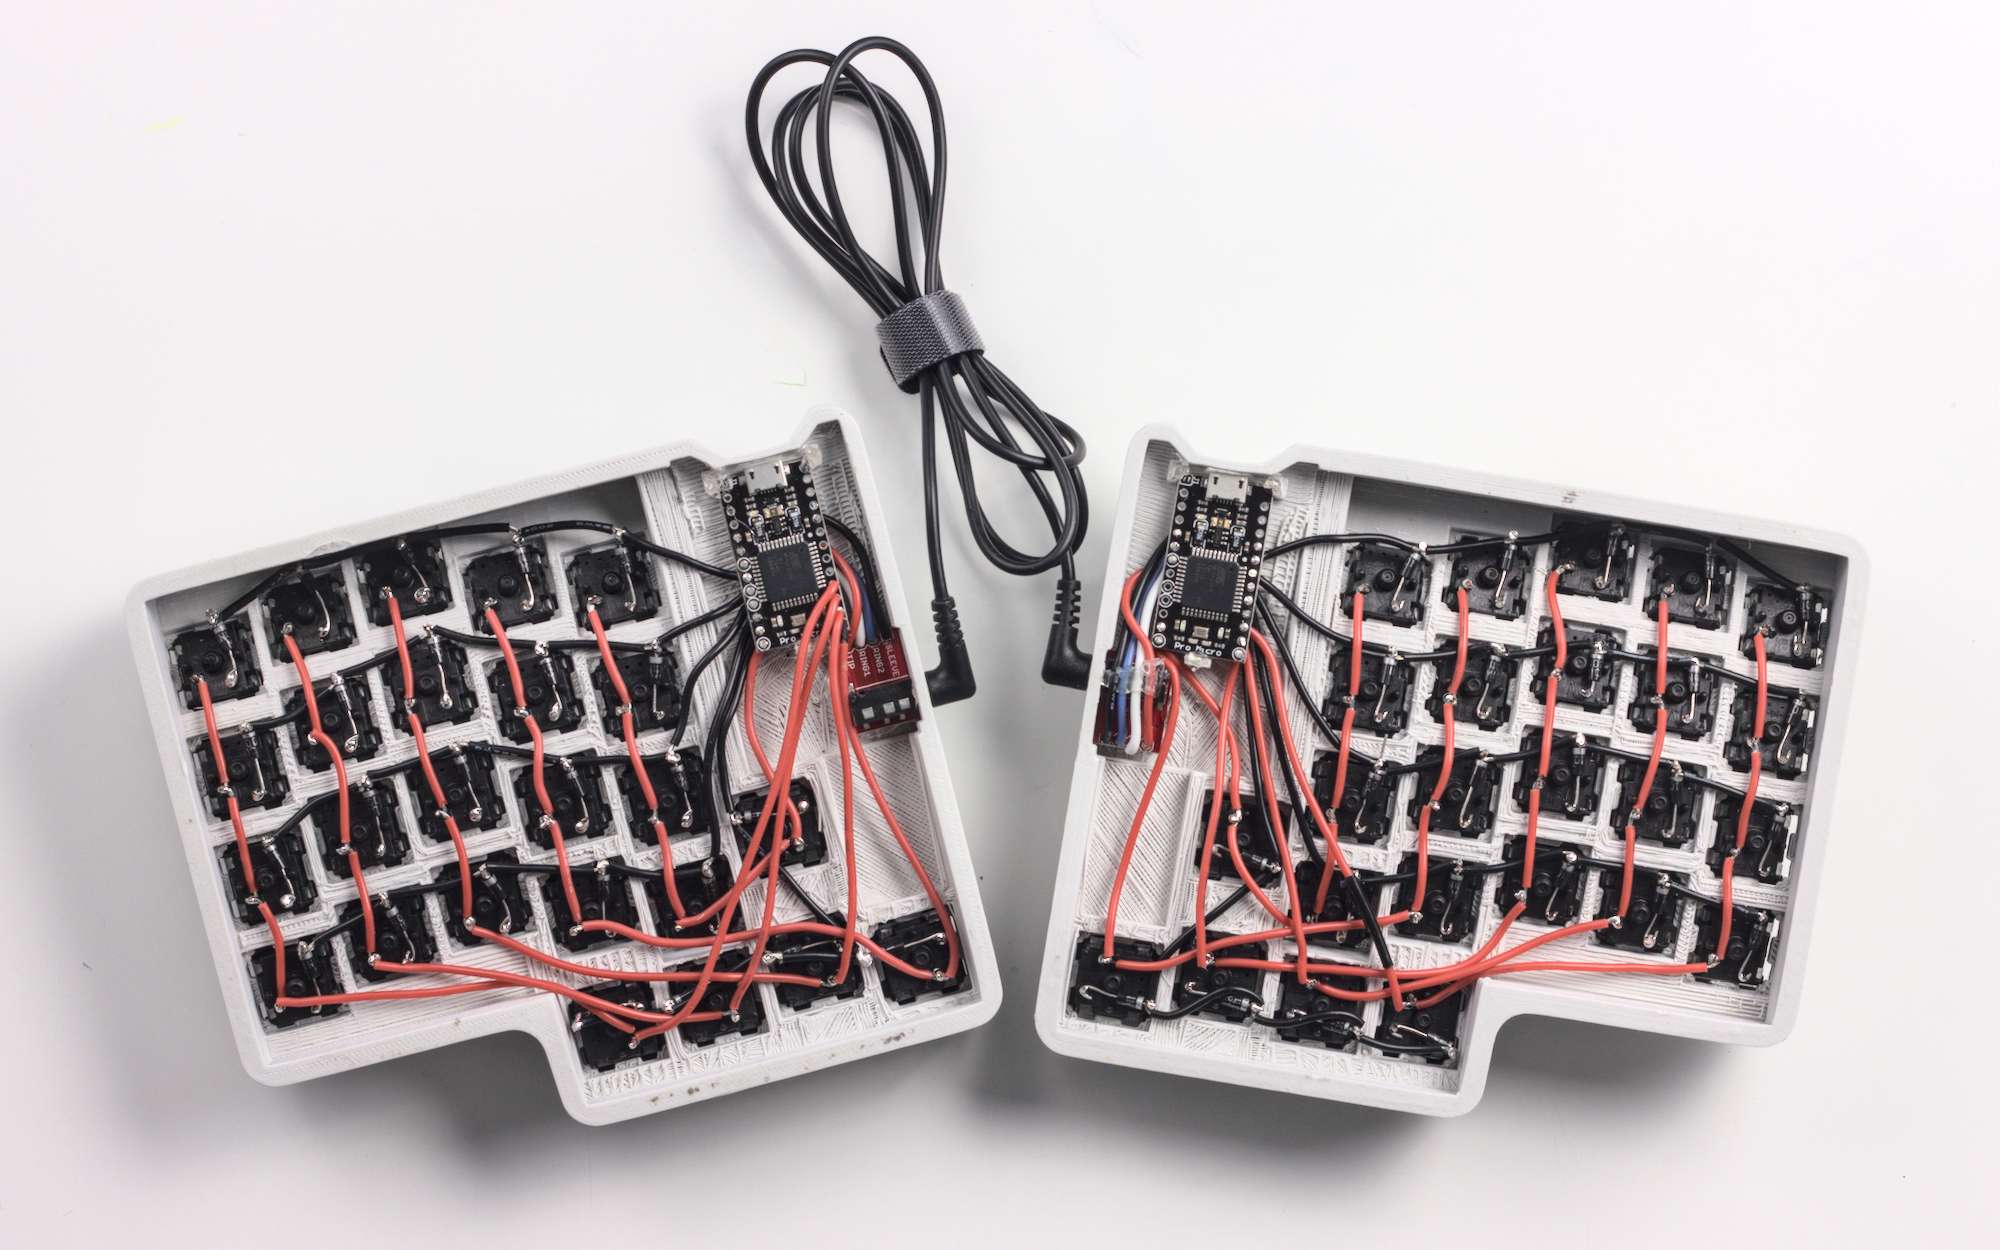 The underside of the split keyboard, showing exposed wiring to each key